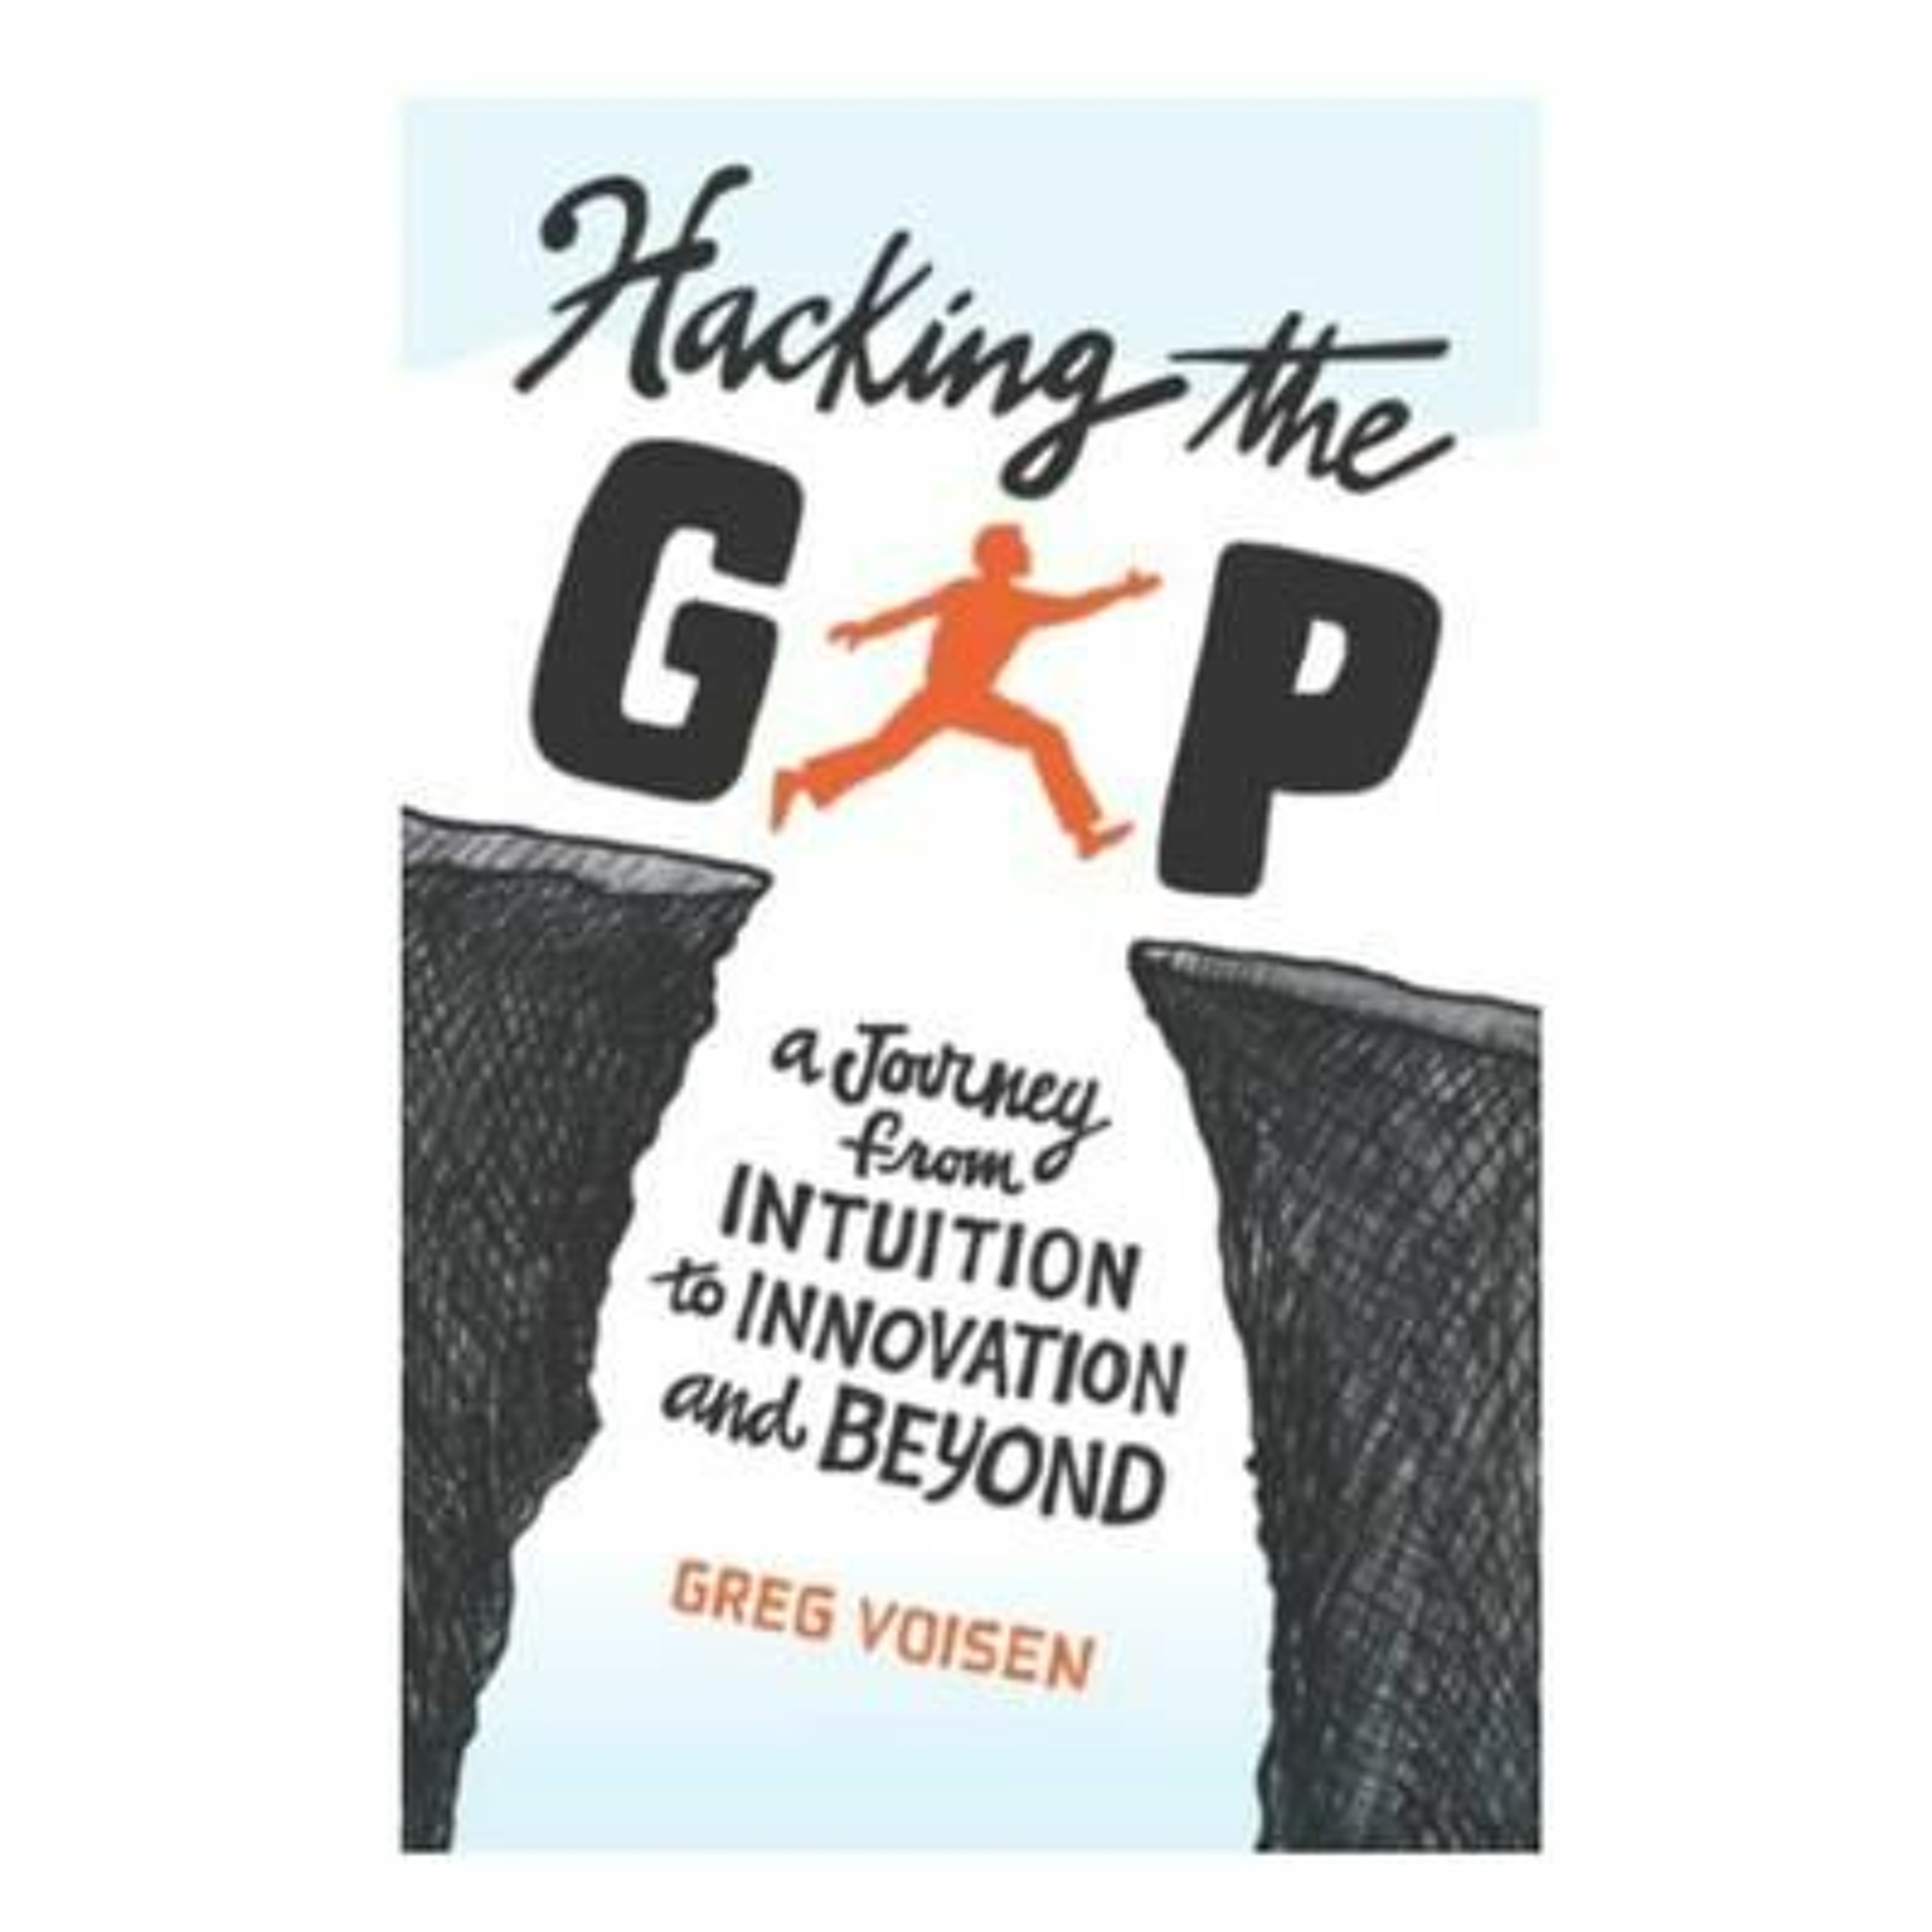 Podcast 961: Hacking the Gap with Greg Voisen by Dr. Joseph Shrand